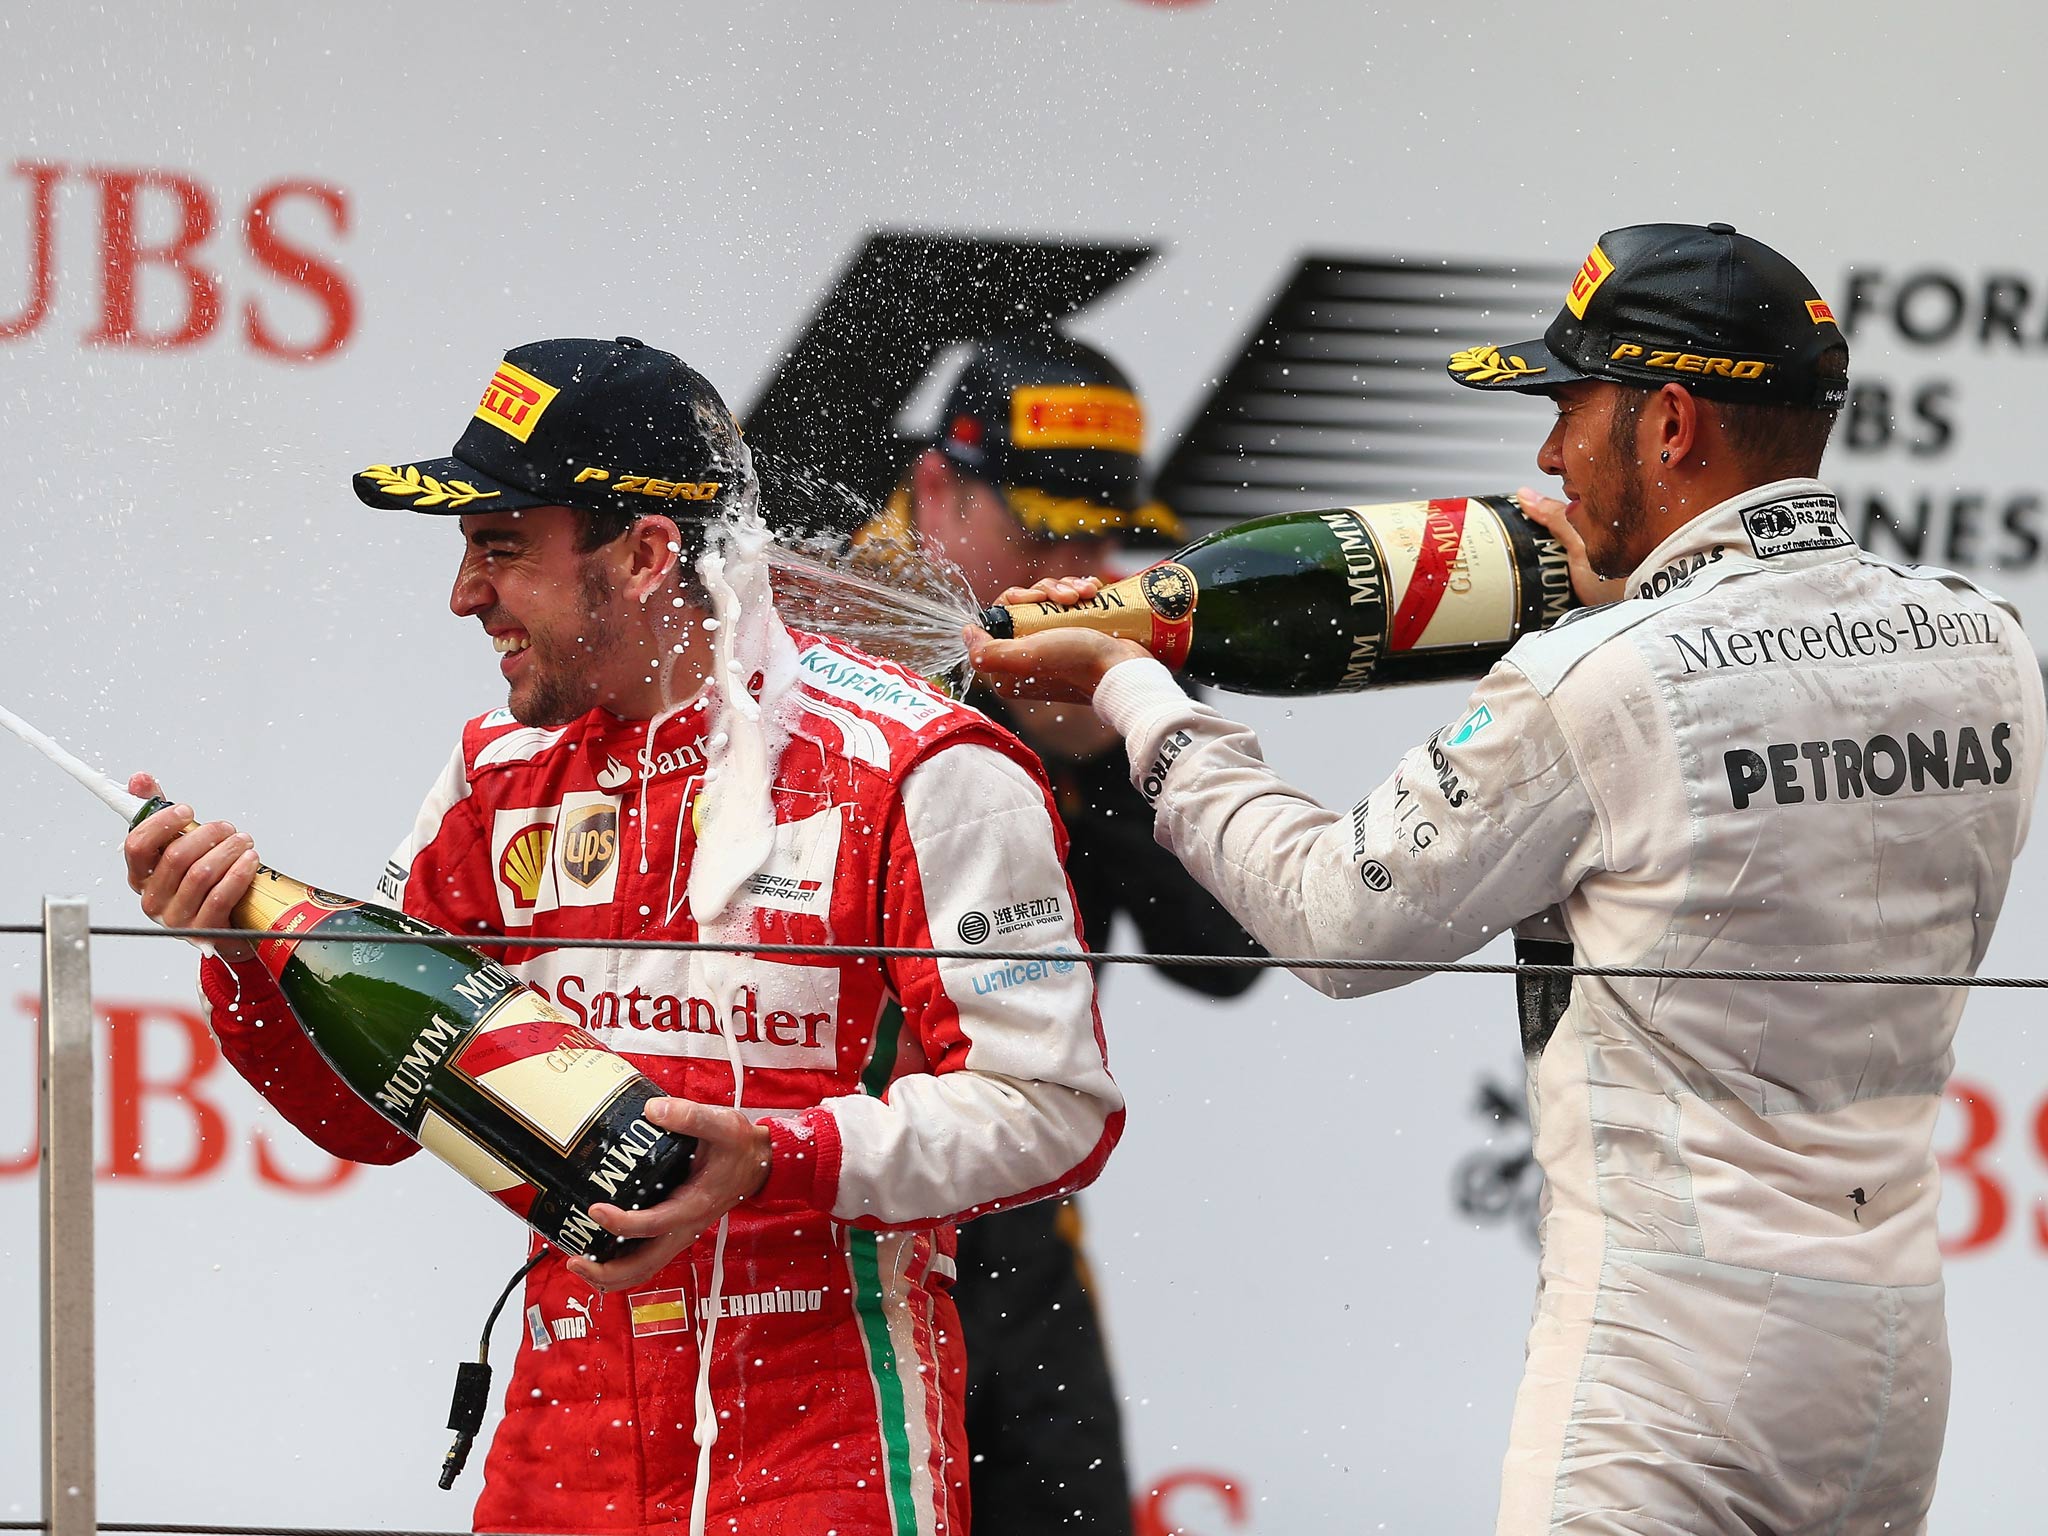 Fernando Alonso celebrates victory at the Chinese Grand Prix